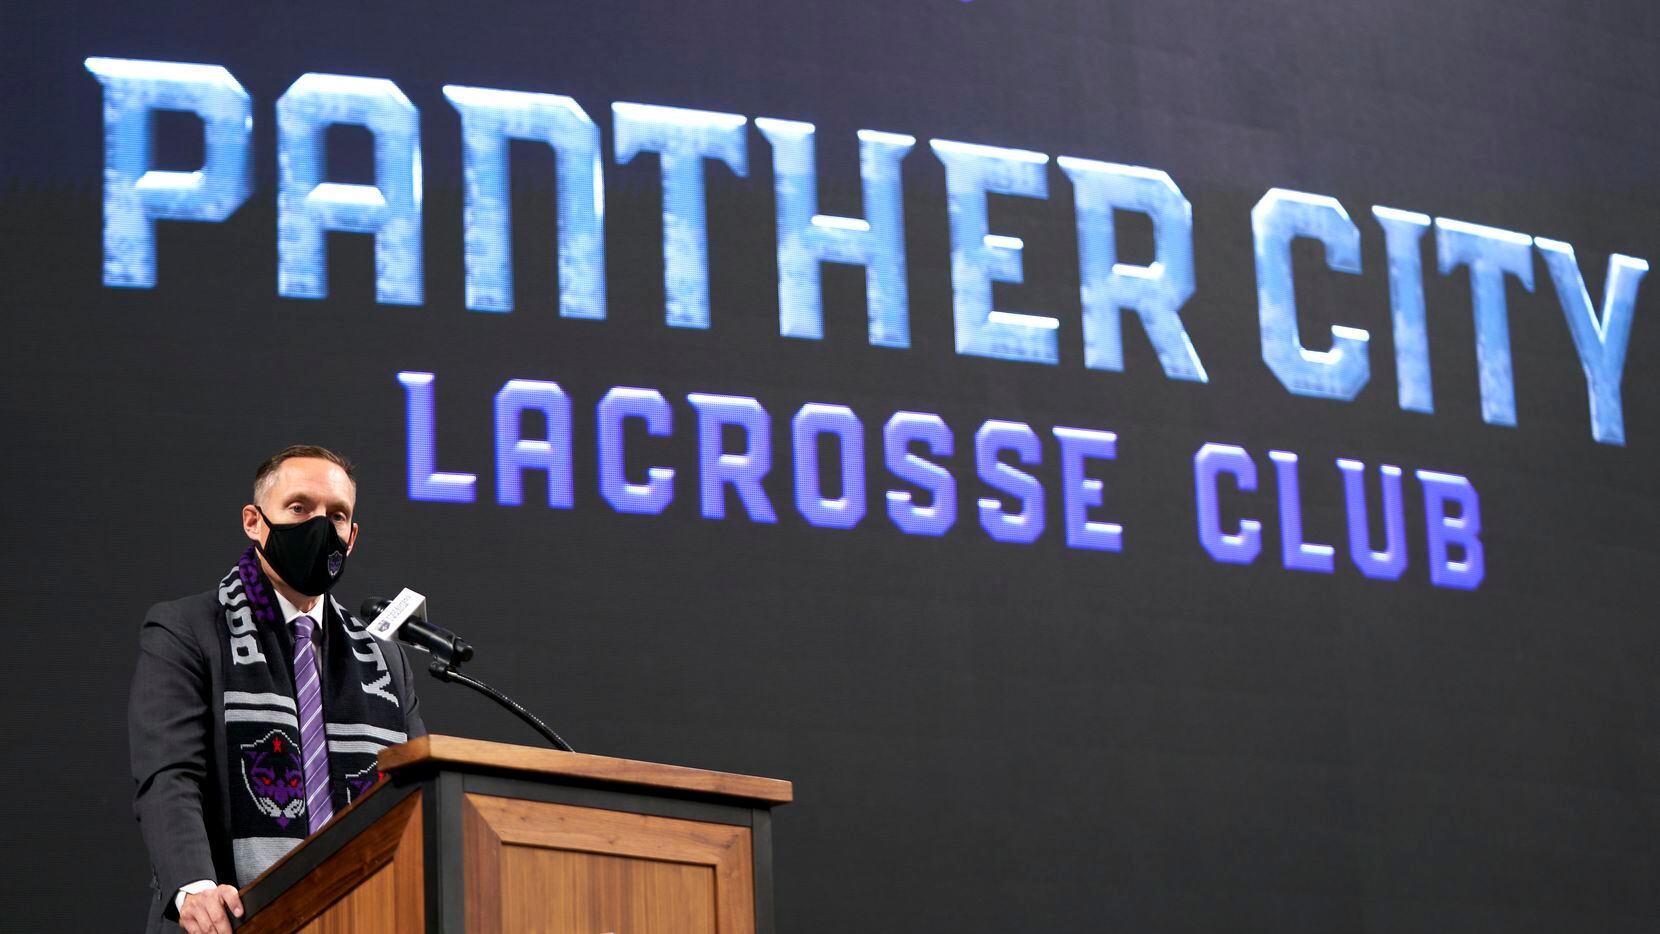 Panther City Lacrosse Club team introduction at Dickies Arena in Fort Worth, Texas on November 17, 2020.